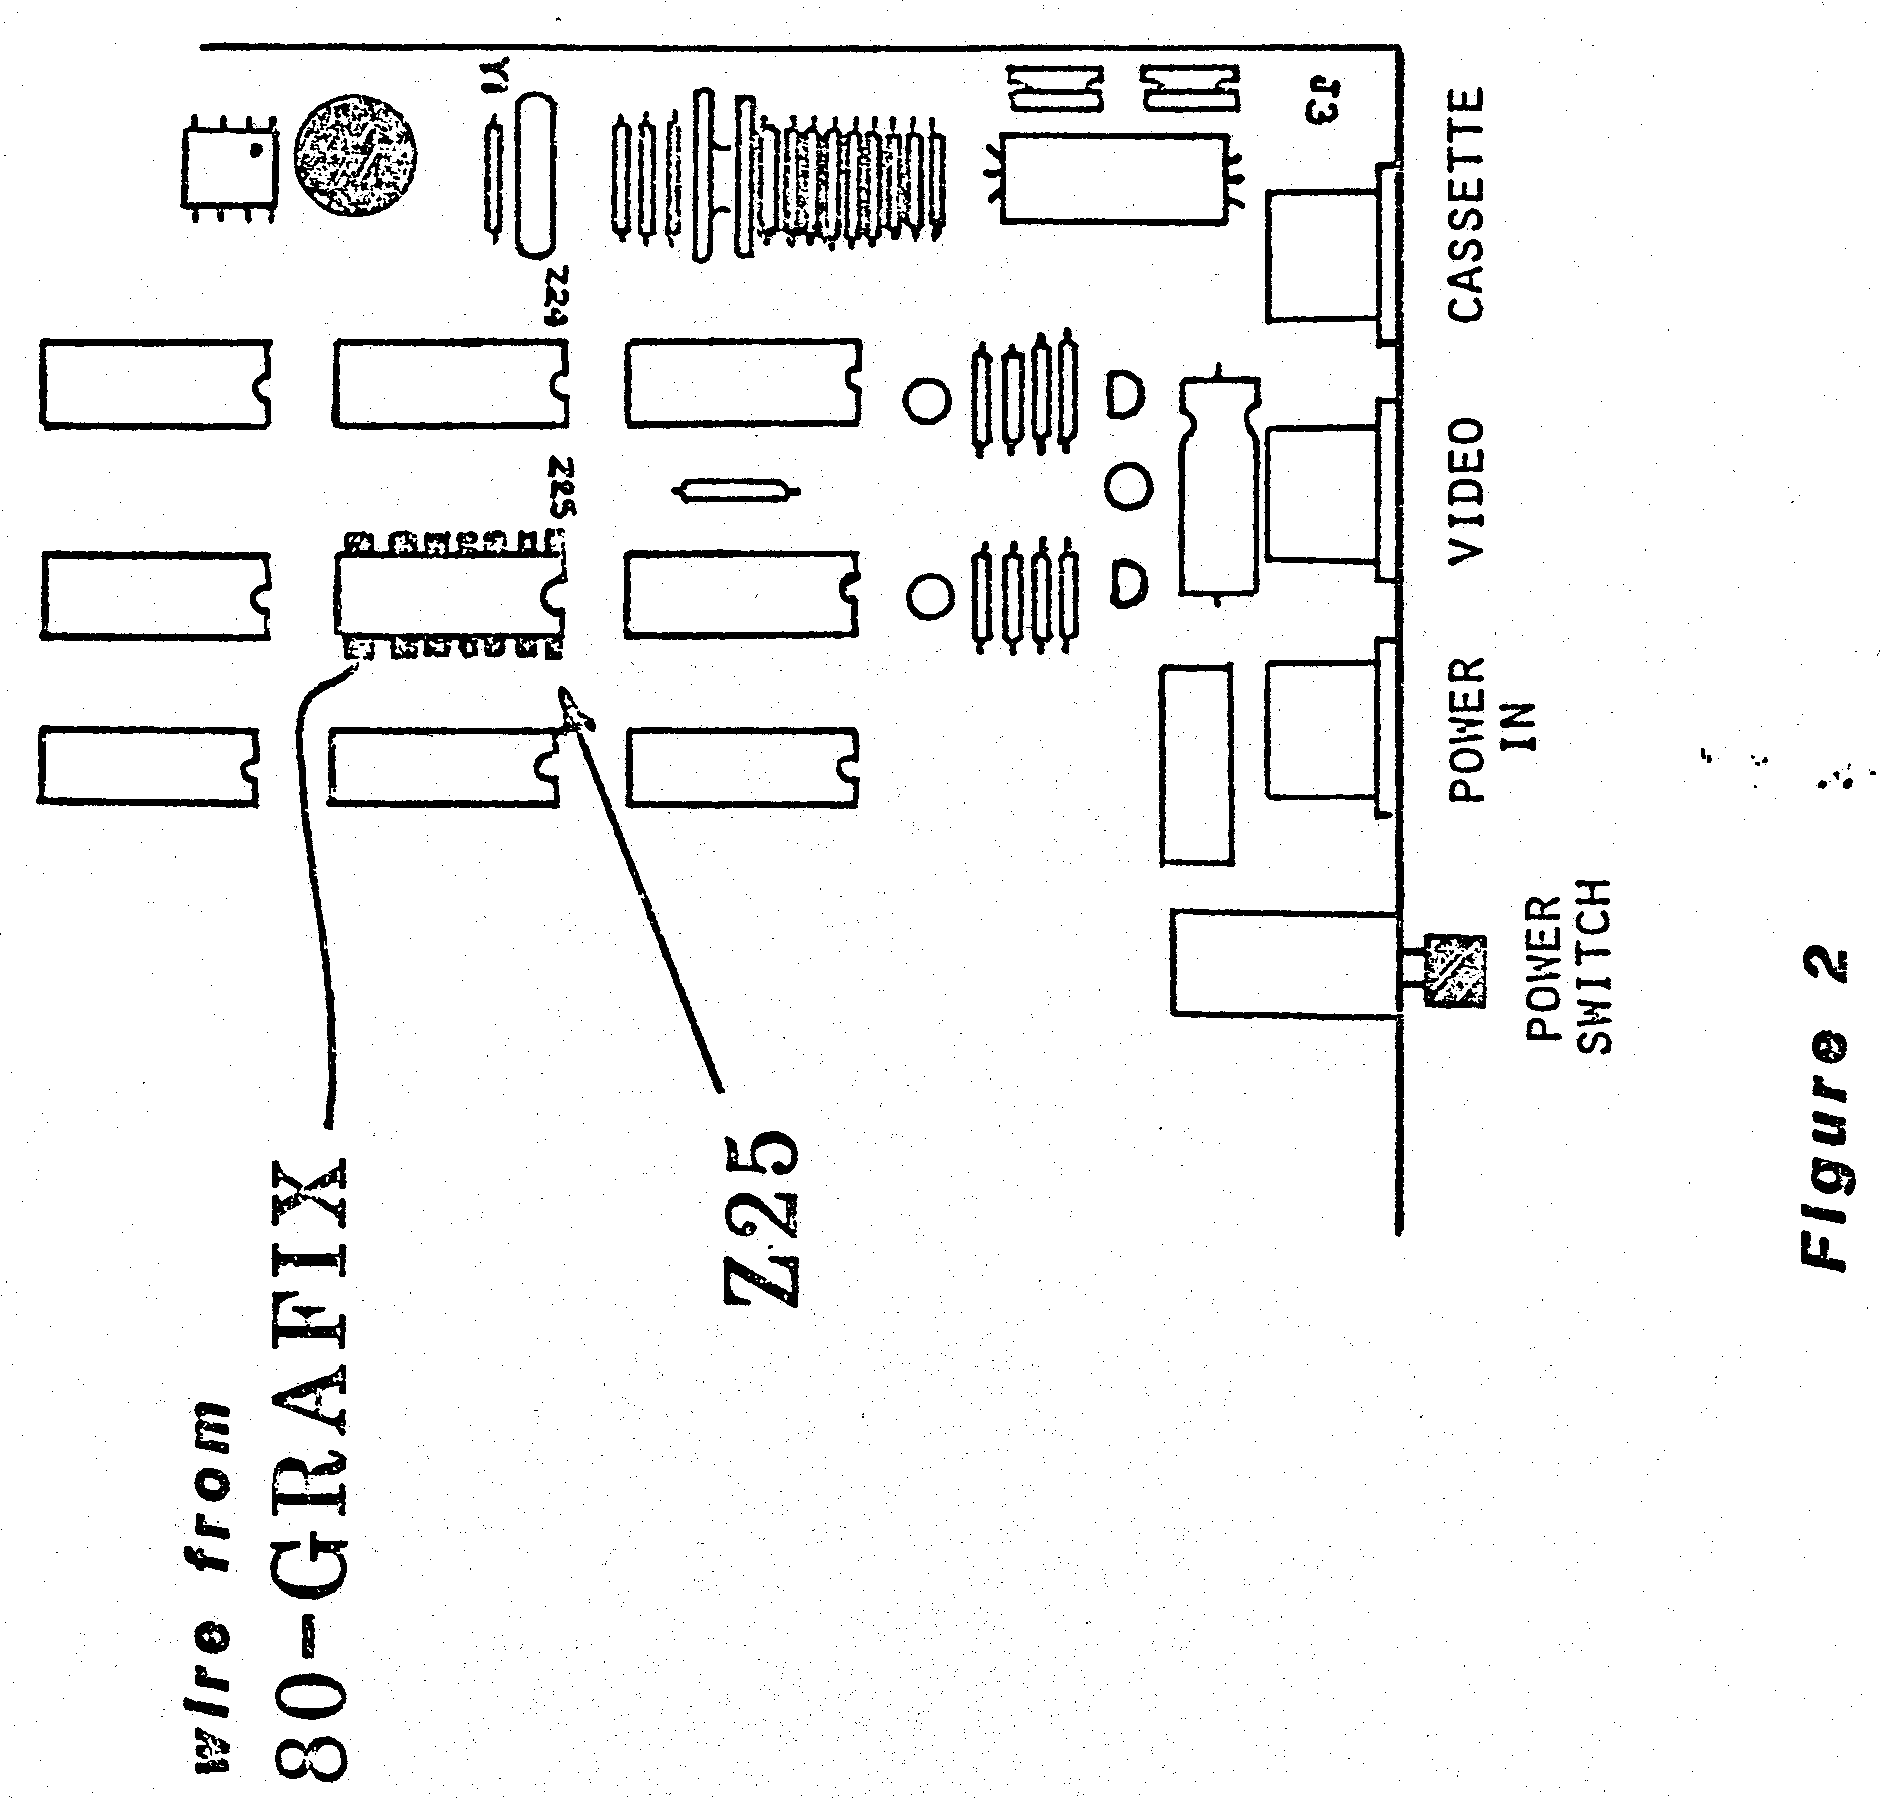 Figure 2: connecting the wire to Z25